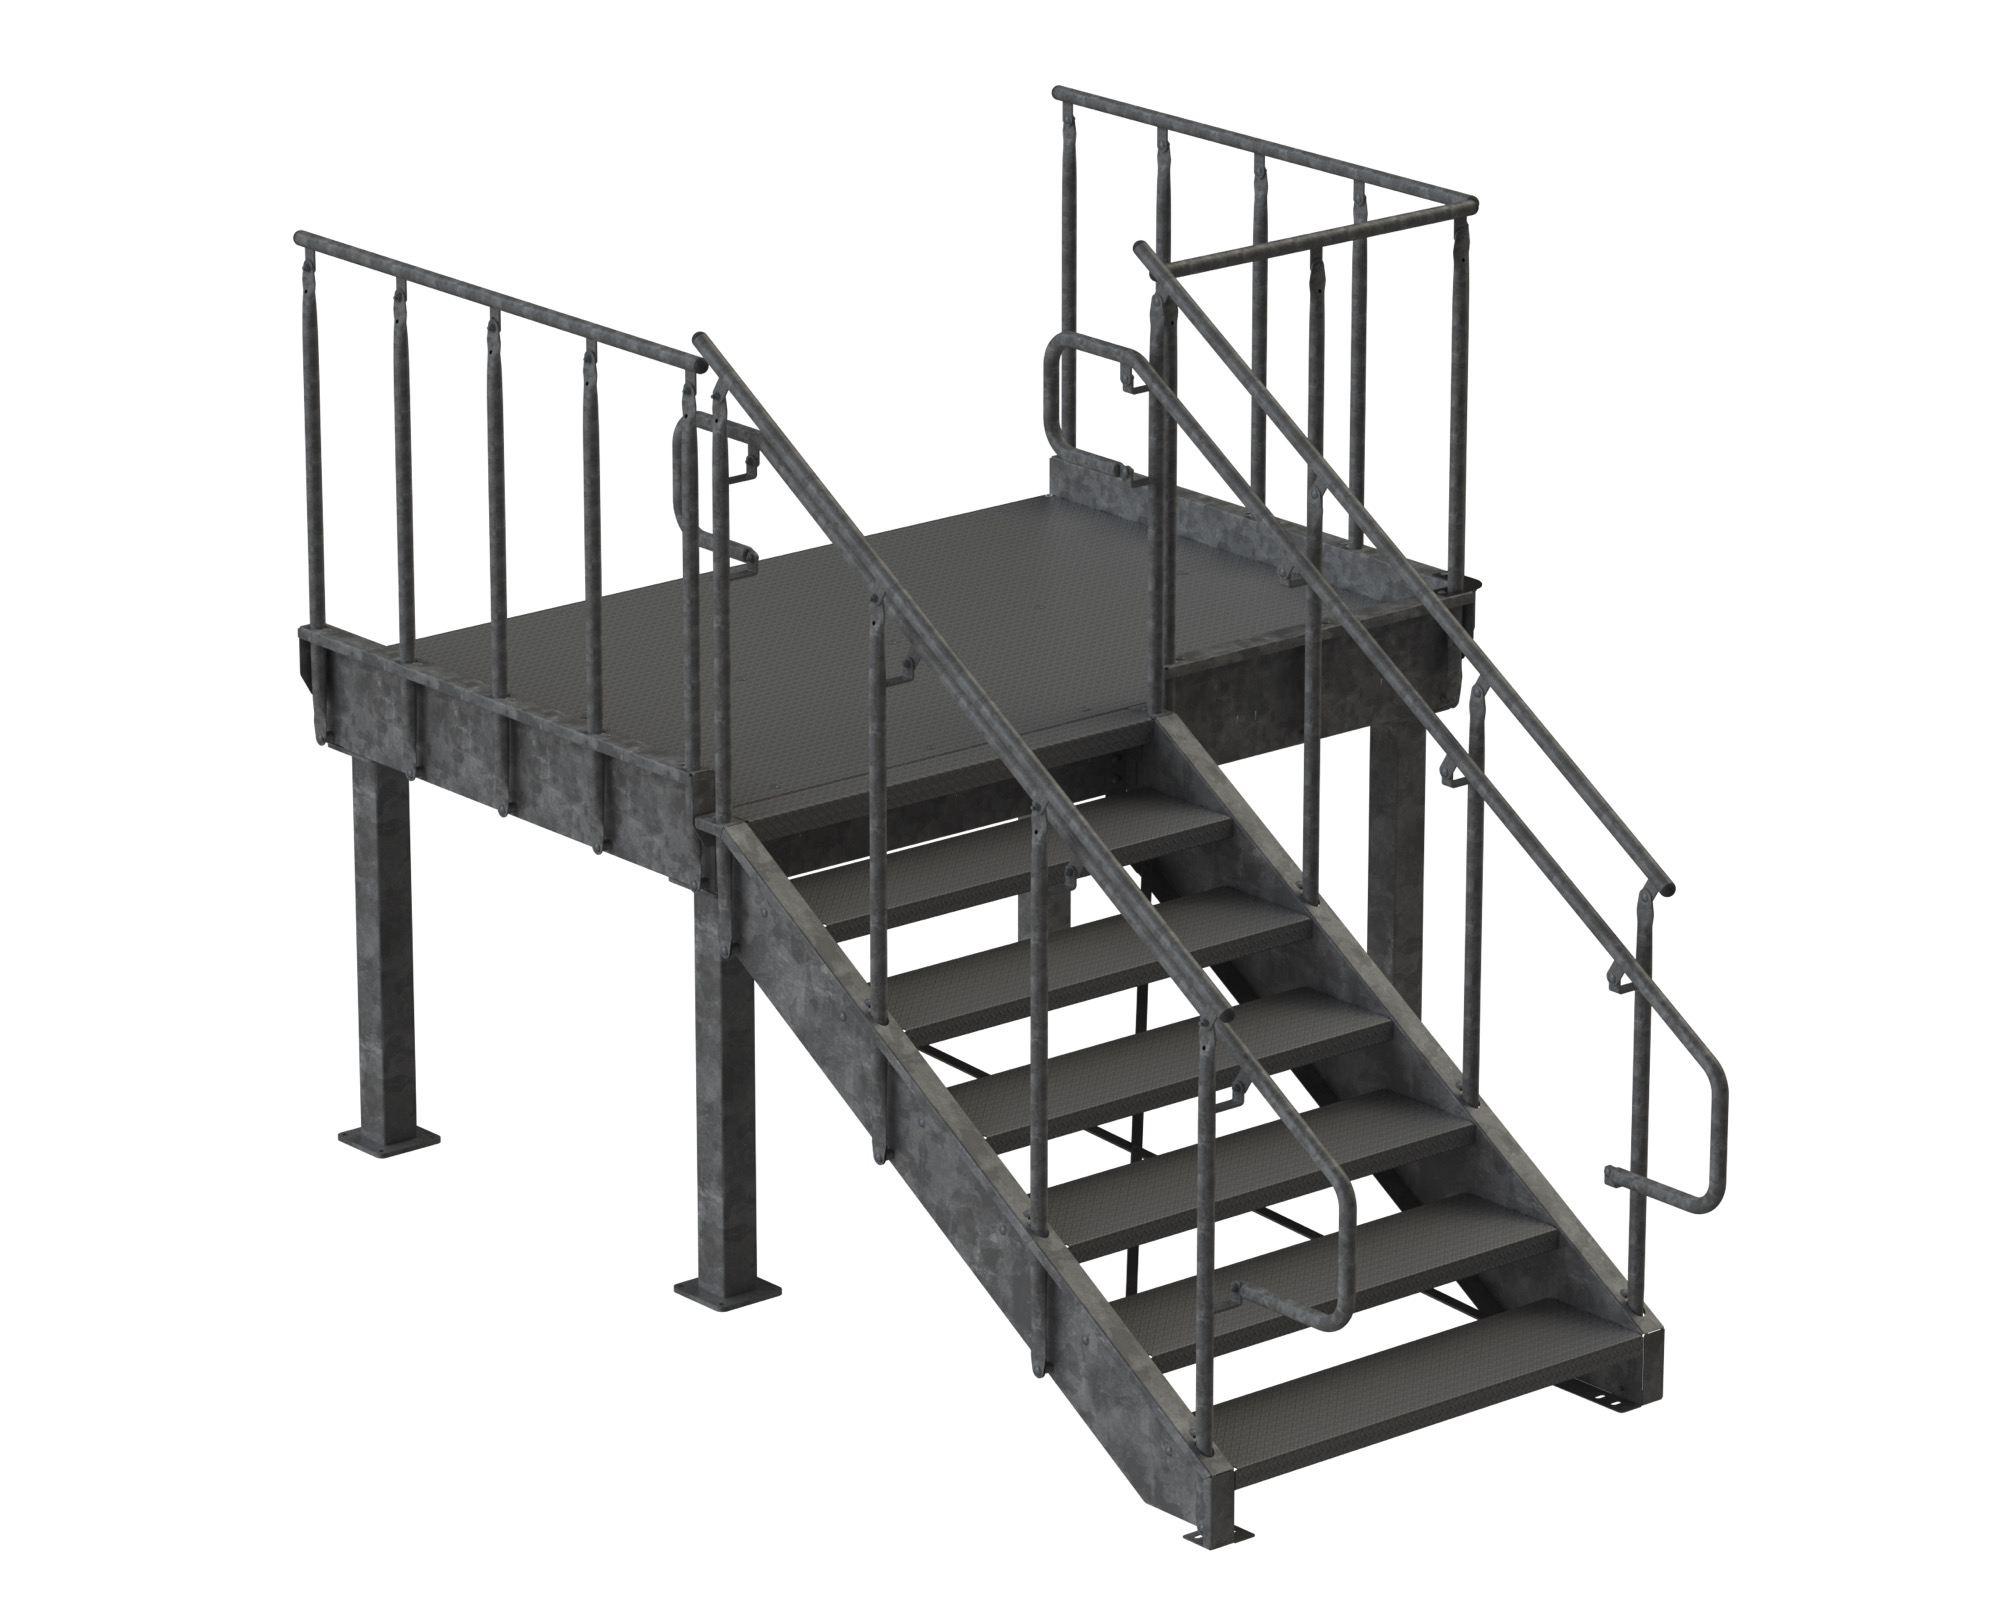 Loading Dock Stairs, Steel, Galvanized, Diamond Plate, IBC-Industrial, Accessible Platform